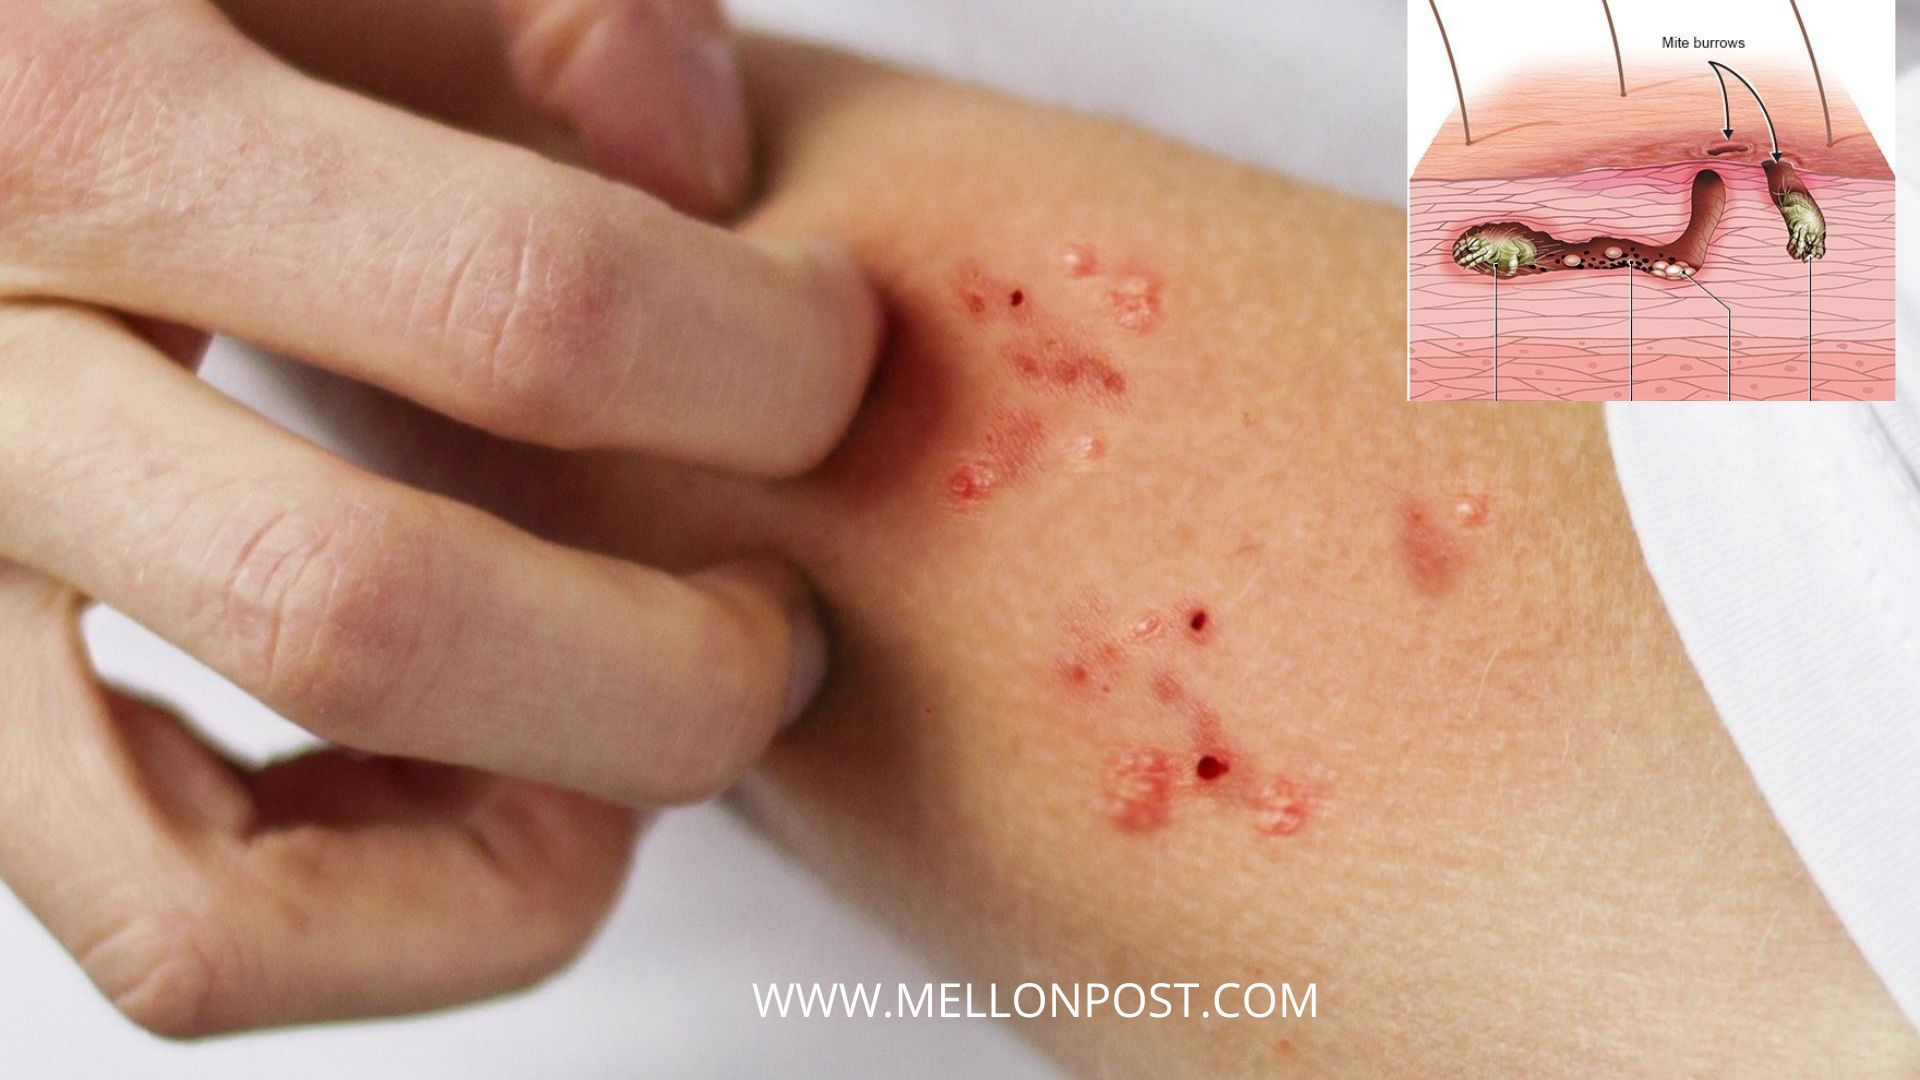 treatments of scabies